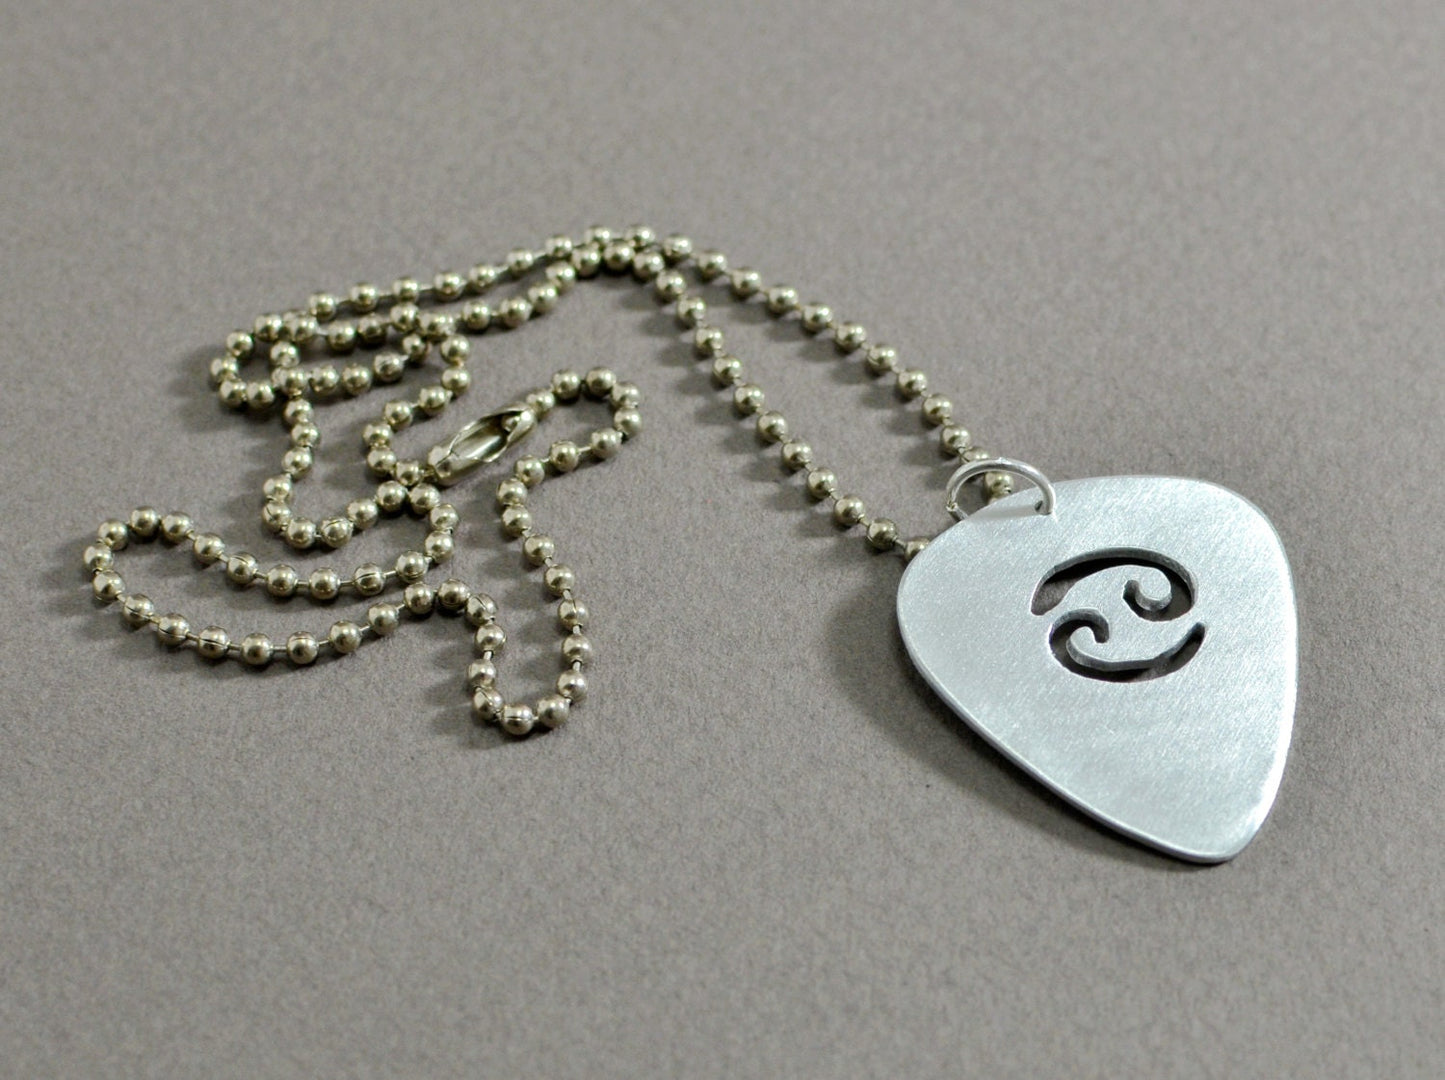 Zodiac sign sterling silver guitar pick necklace series